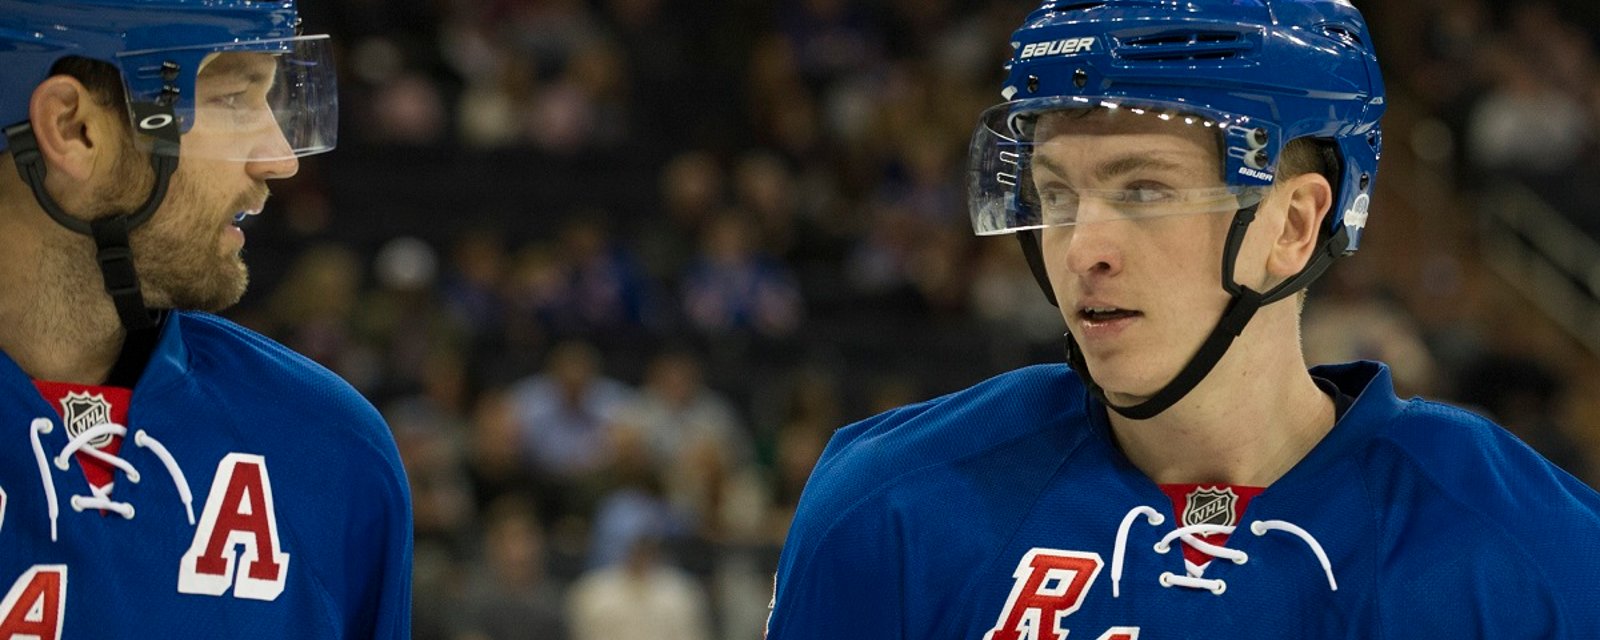 Watch top college prospect Jimmy Vesey score his first in the NHL.